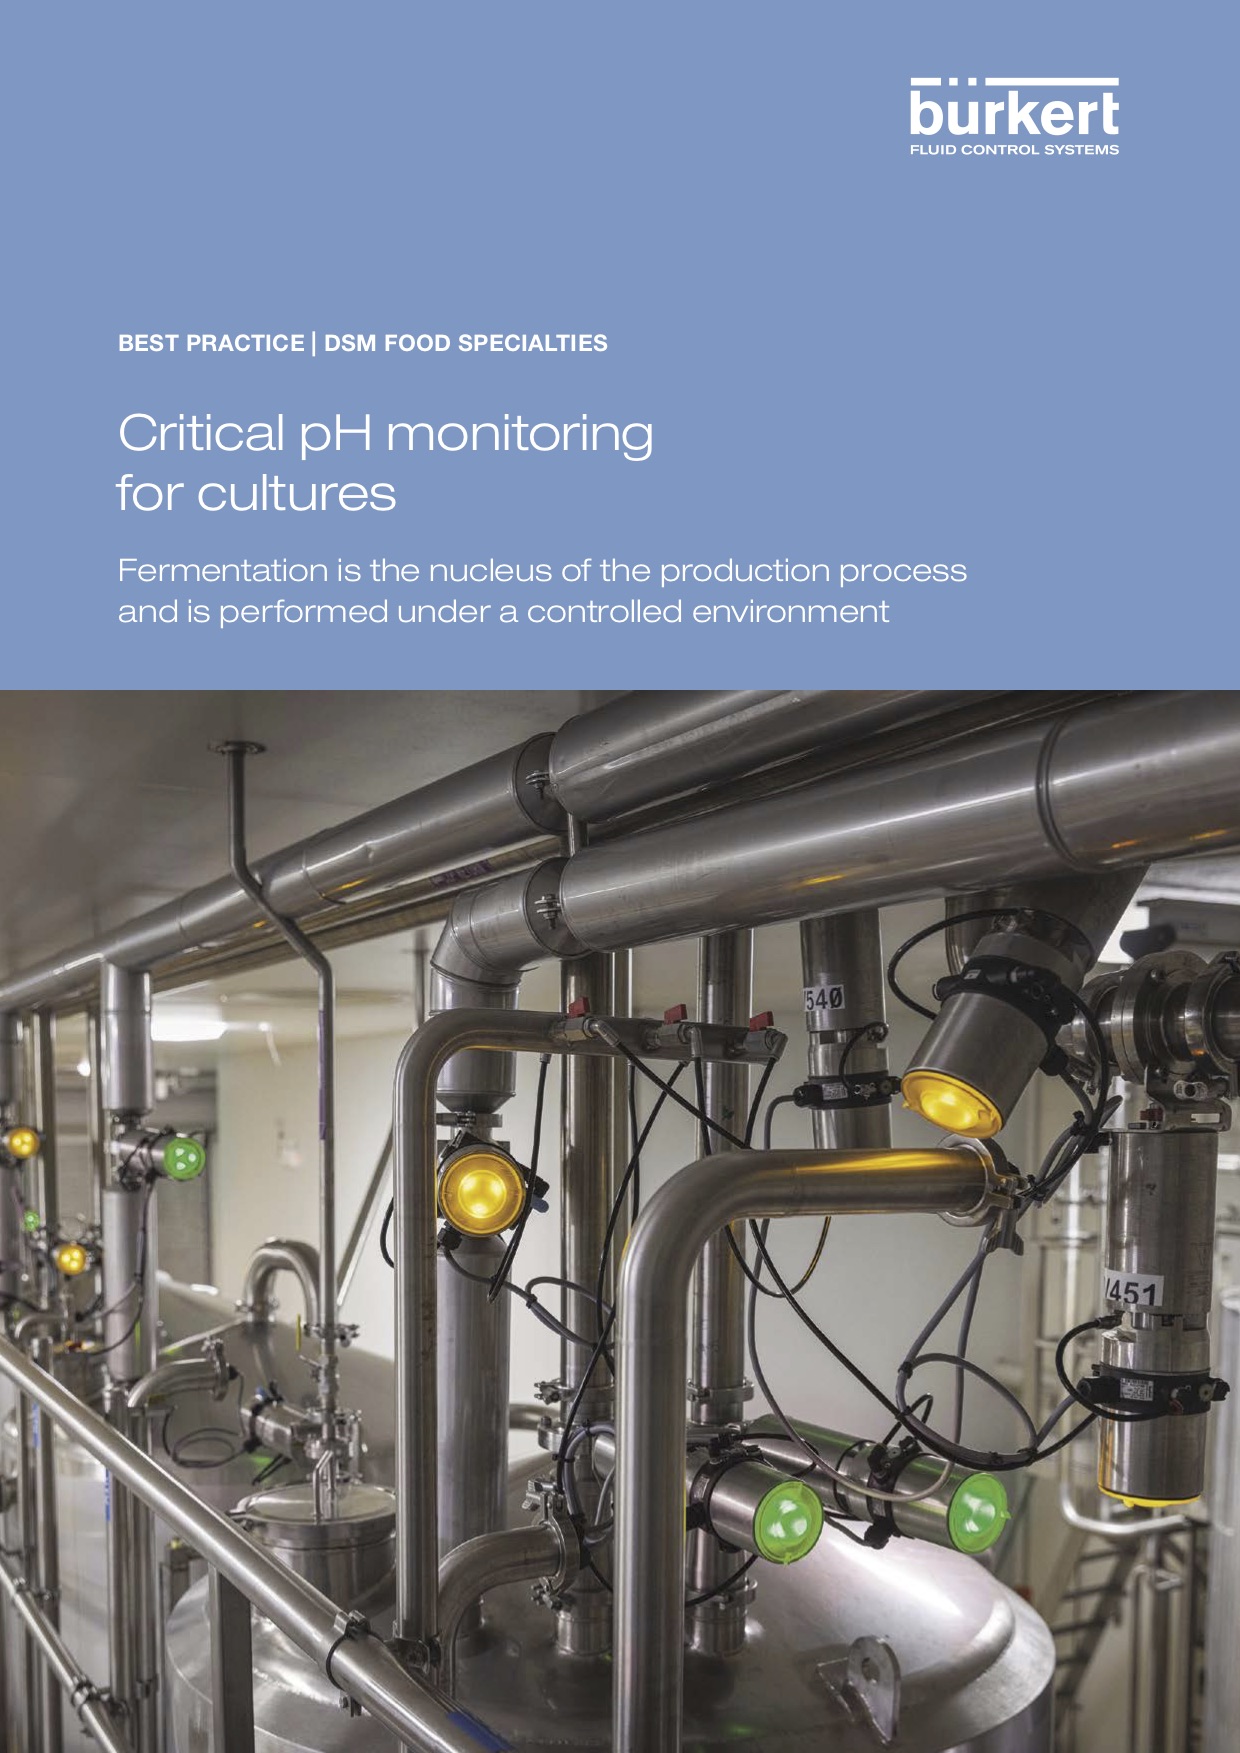 Critical pH monitoring for cultures